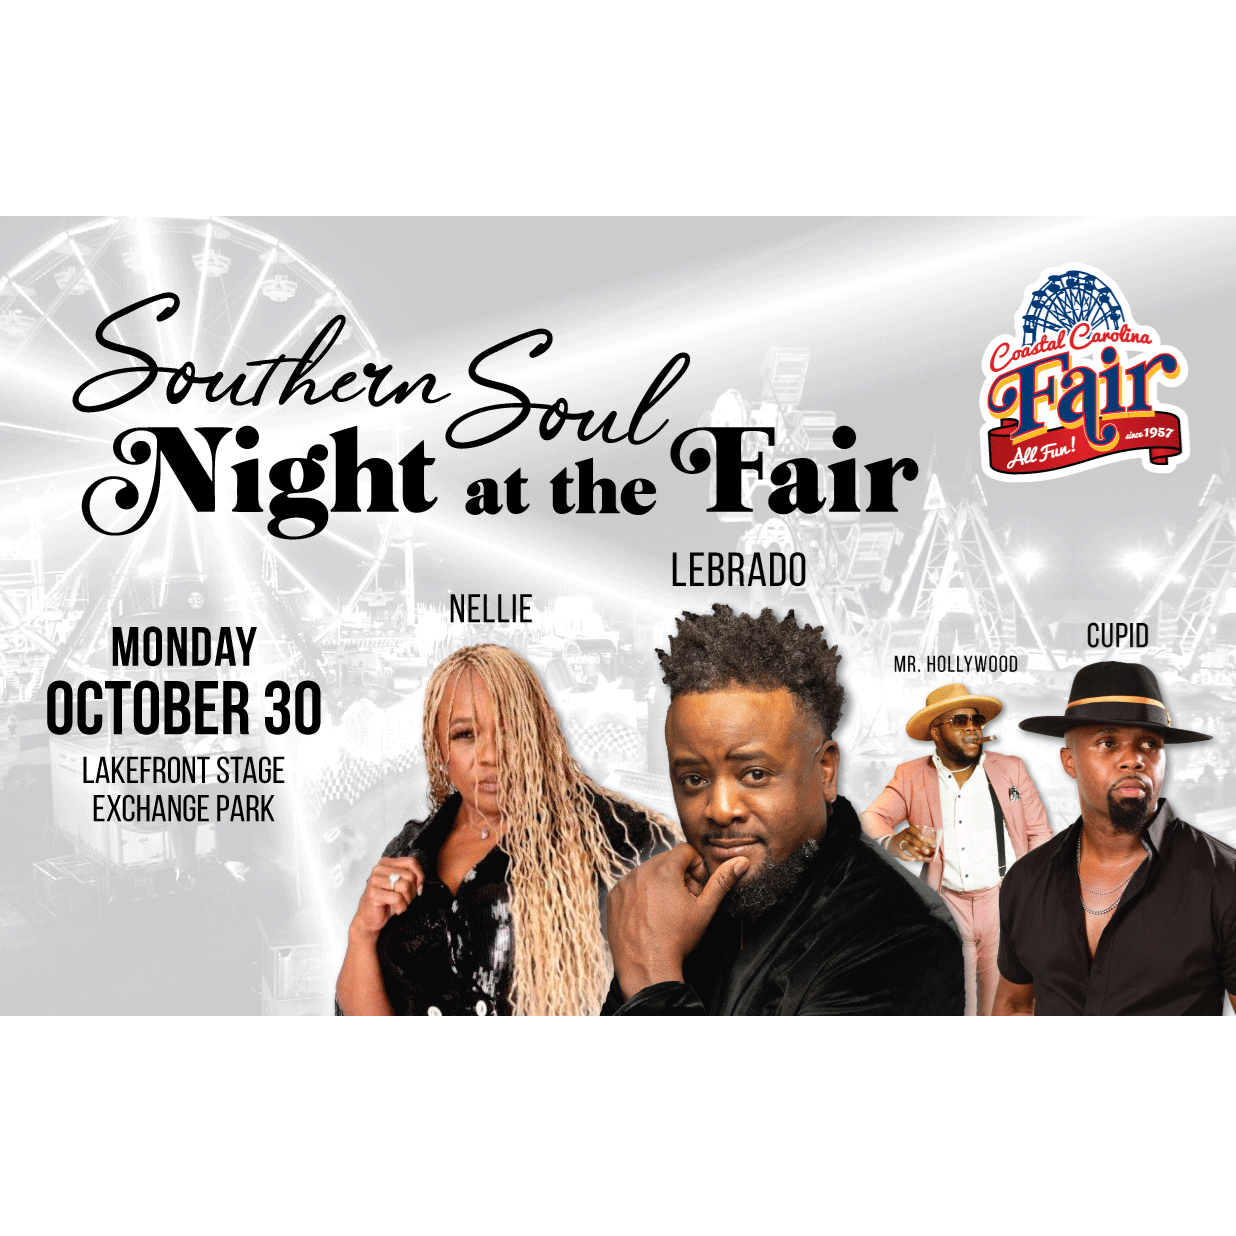 Southern Soul Night at the Fair